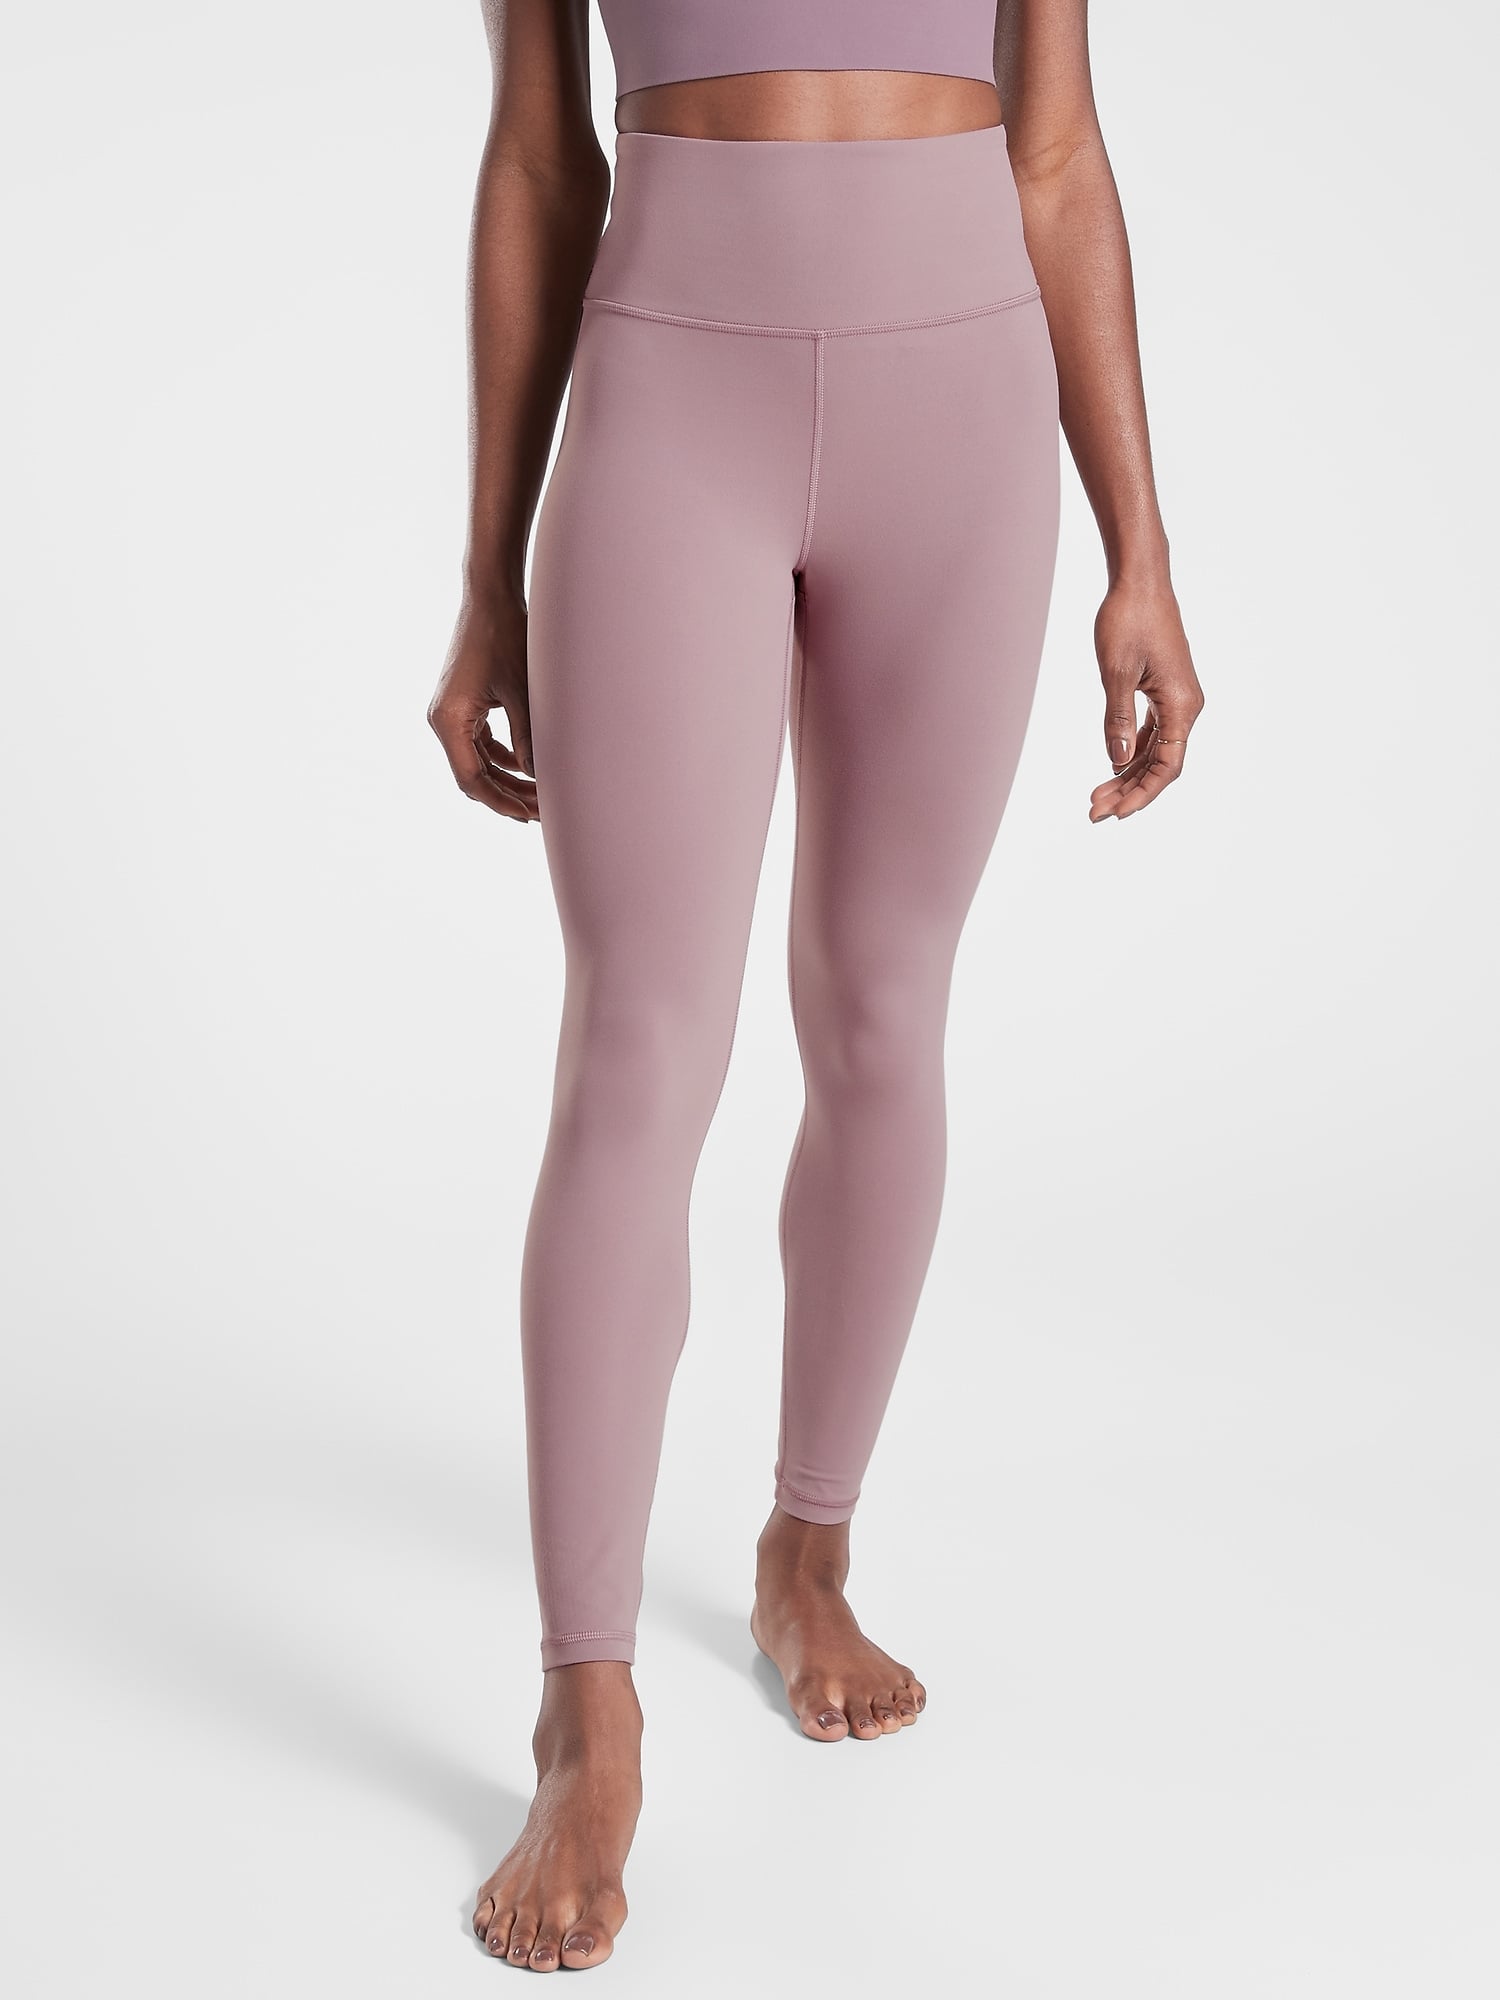 Athleta Girl Mesh Stash Your Treasures Tight, Gym Class Hero! This Brand  Has the Best Mother-Daughter Fitness Sets